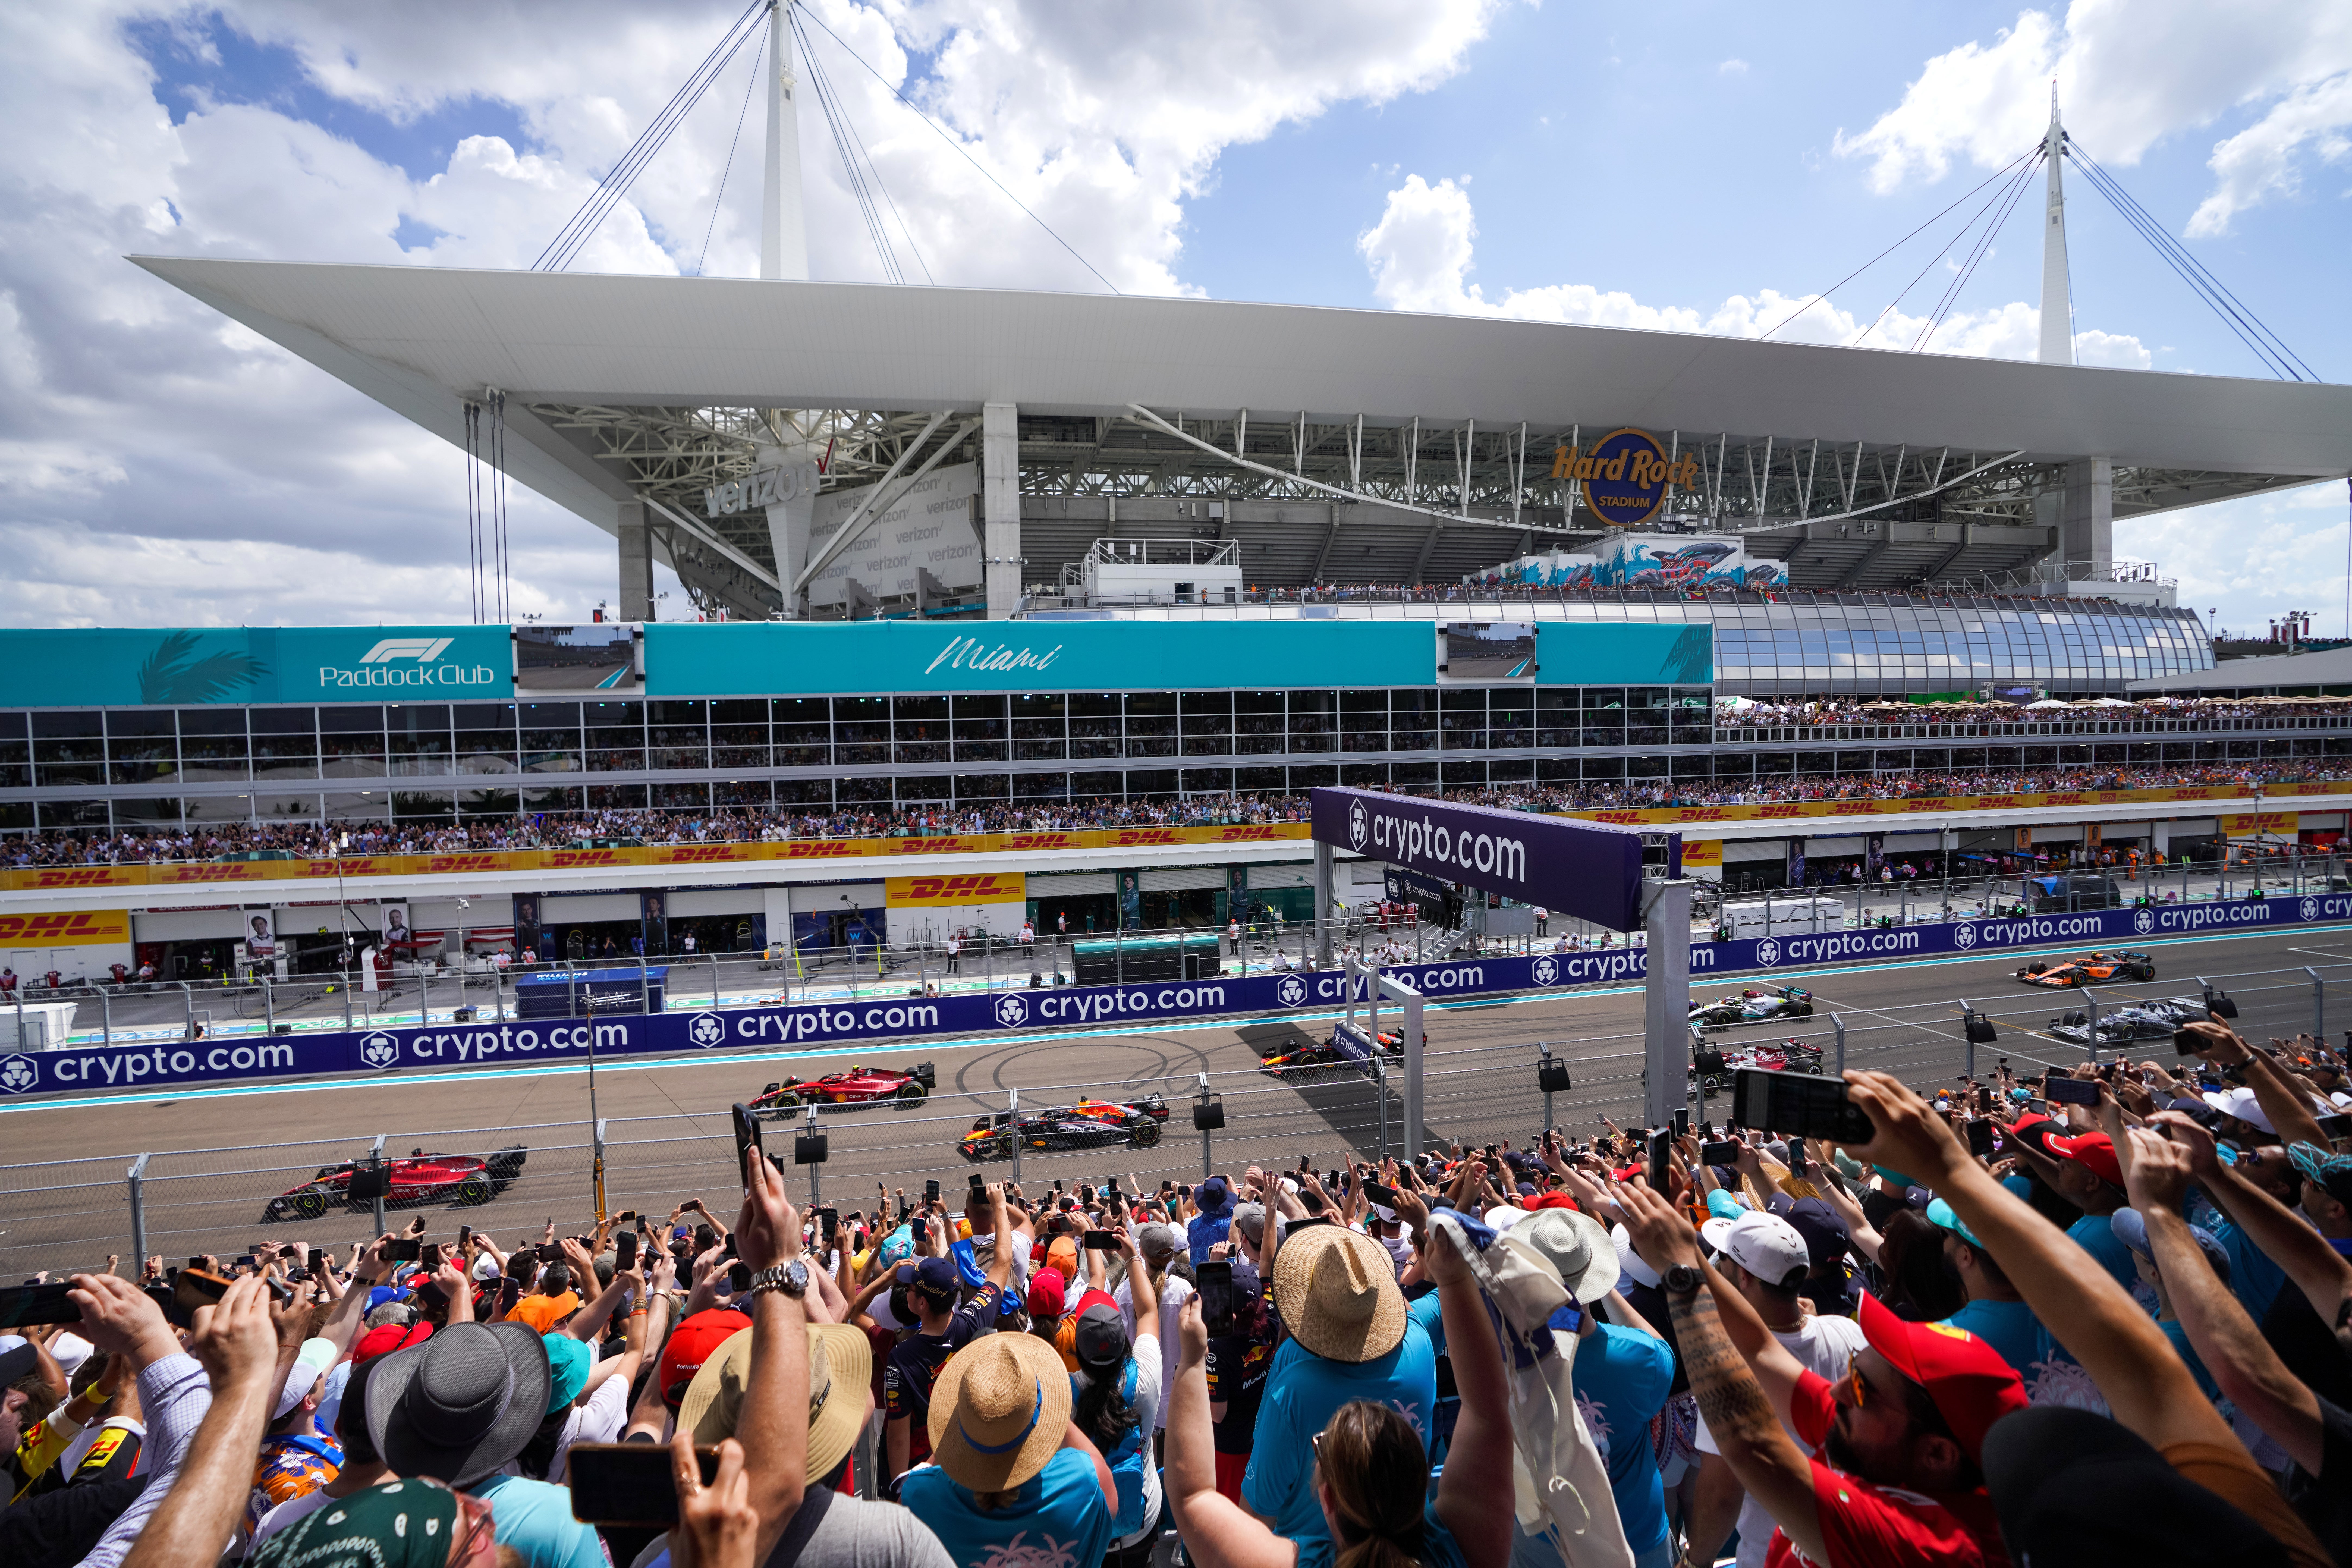 Miami hosts is second ever Formula 1 race this weekend around the Hard Rock Stadium